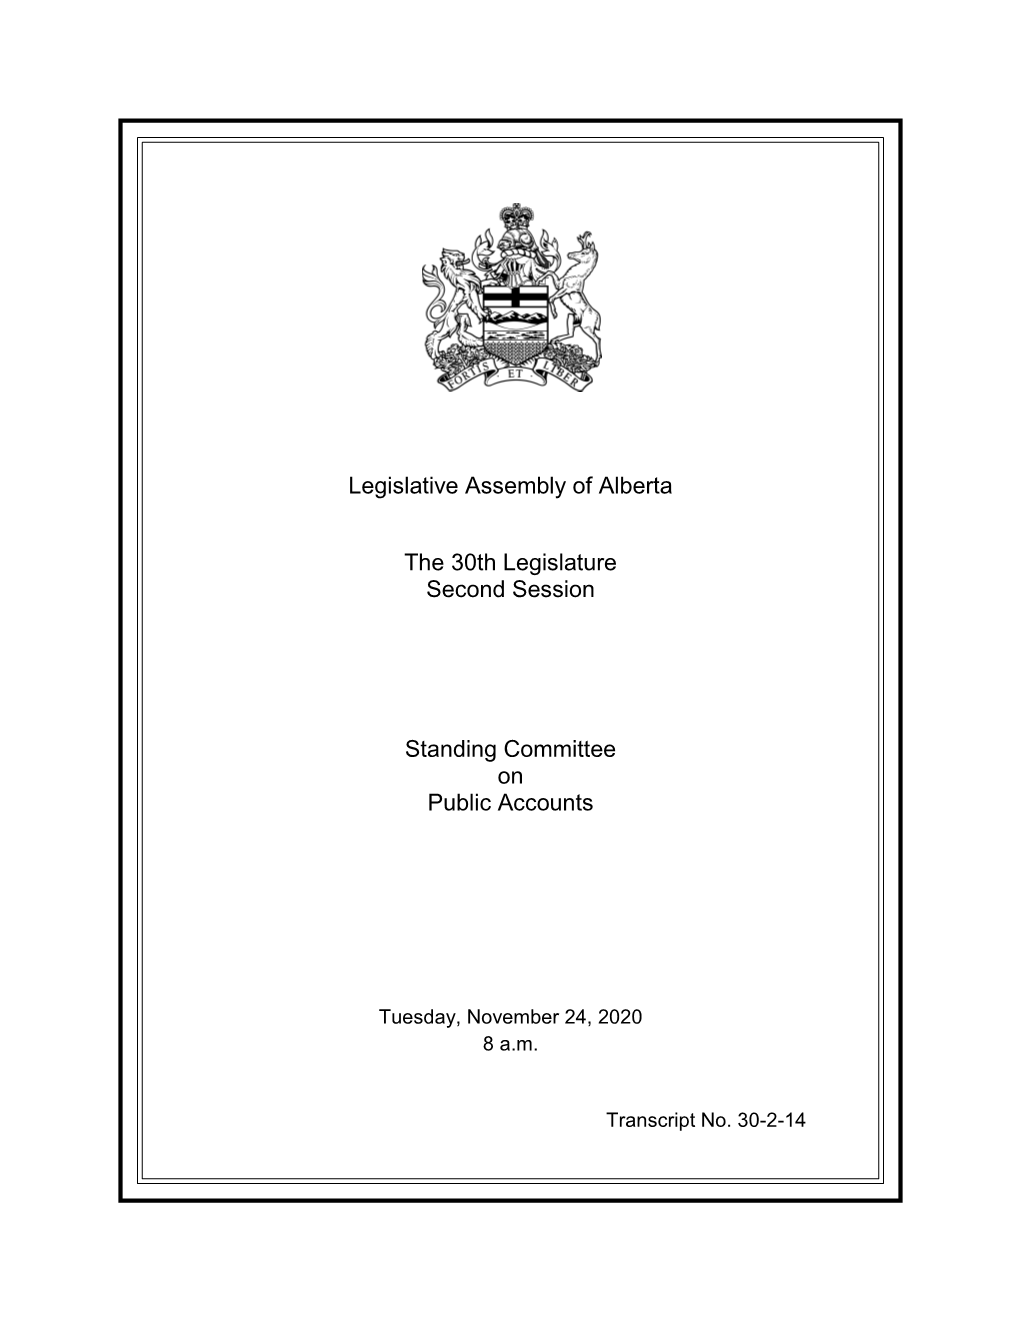 Legislative Assembly of Alberta the 30Th Legislature Second Session Standing Committee on Public Accounts